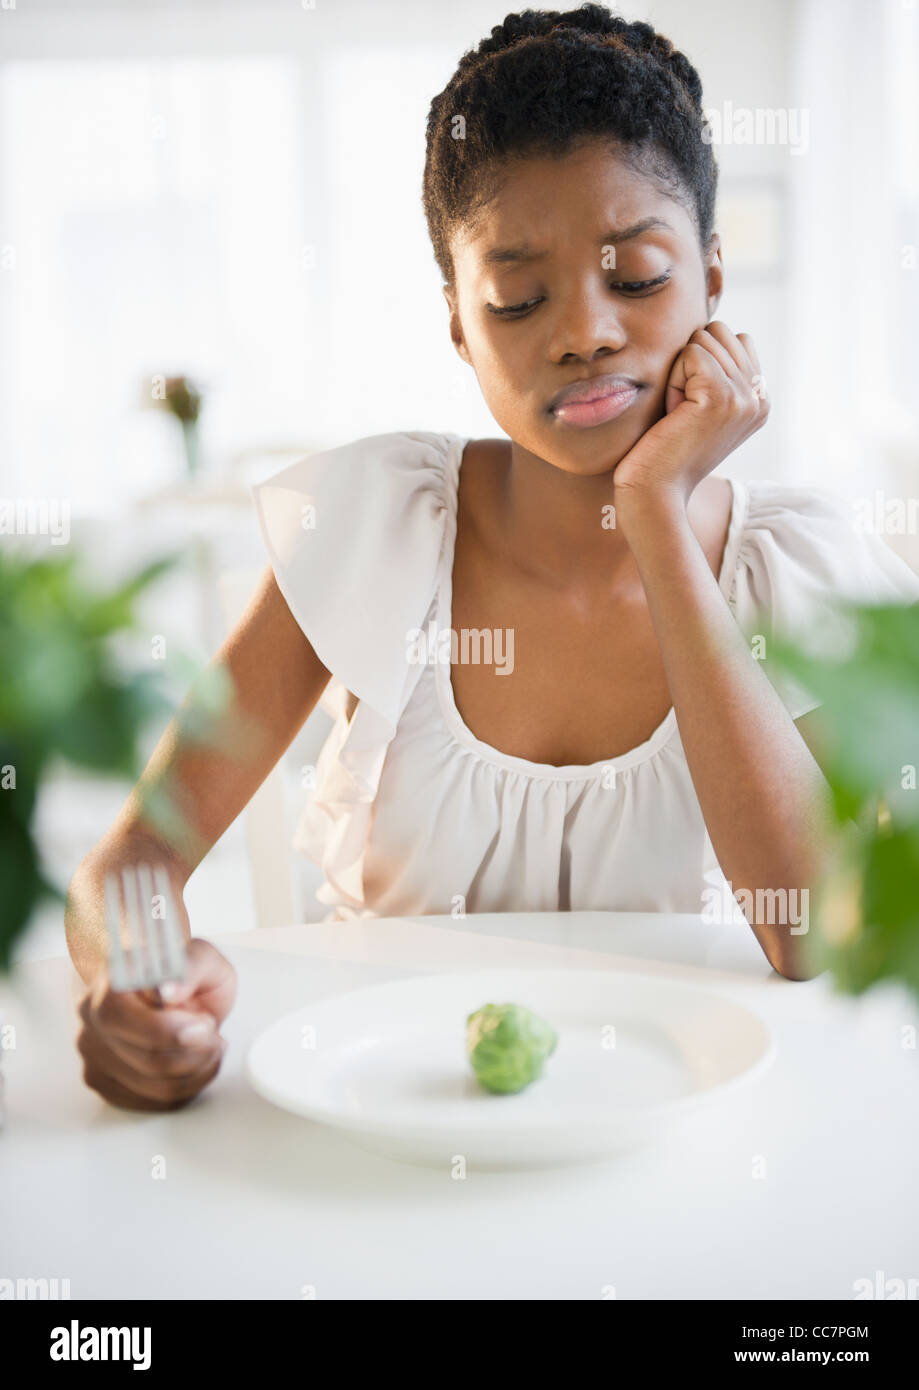 Frustrated Black woman looking at brussels sprout Stock Photo